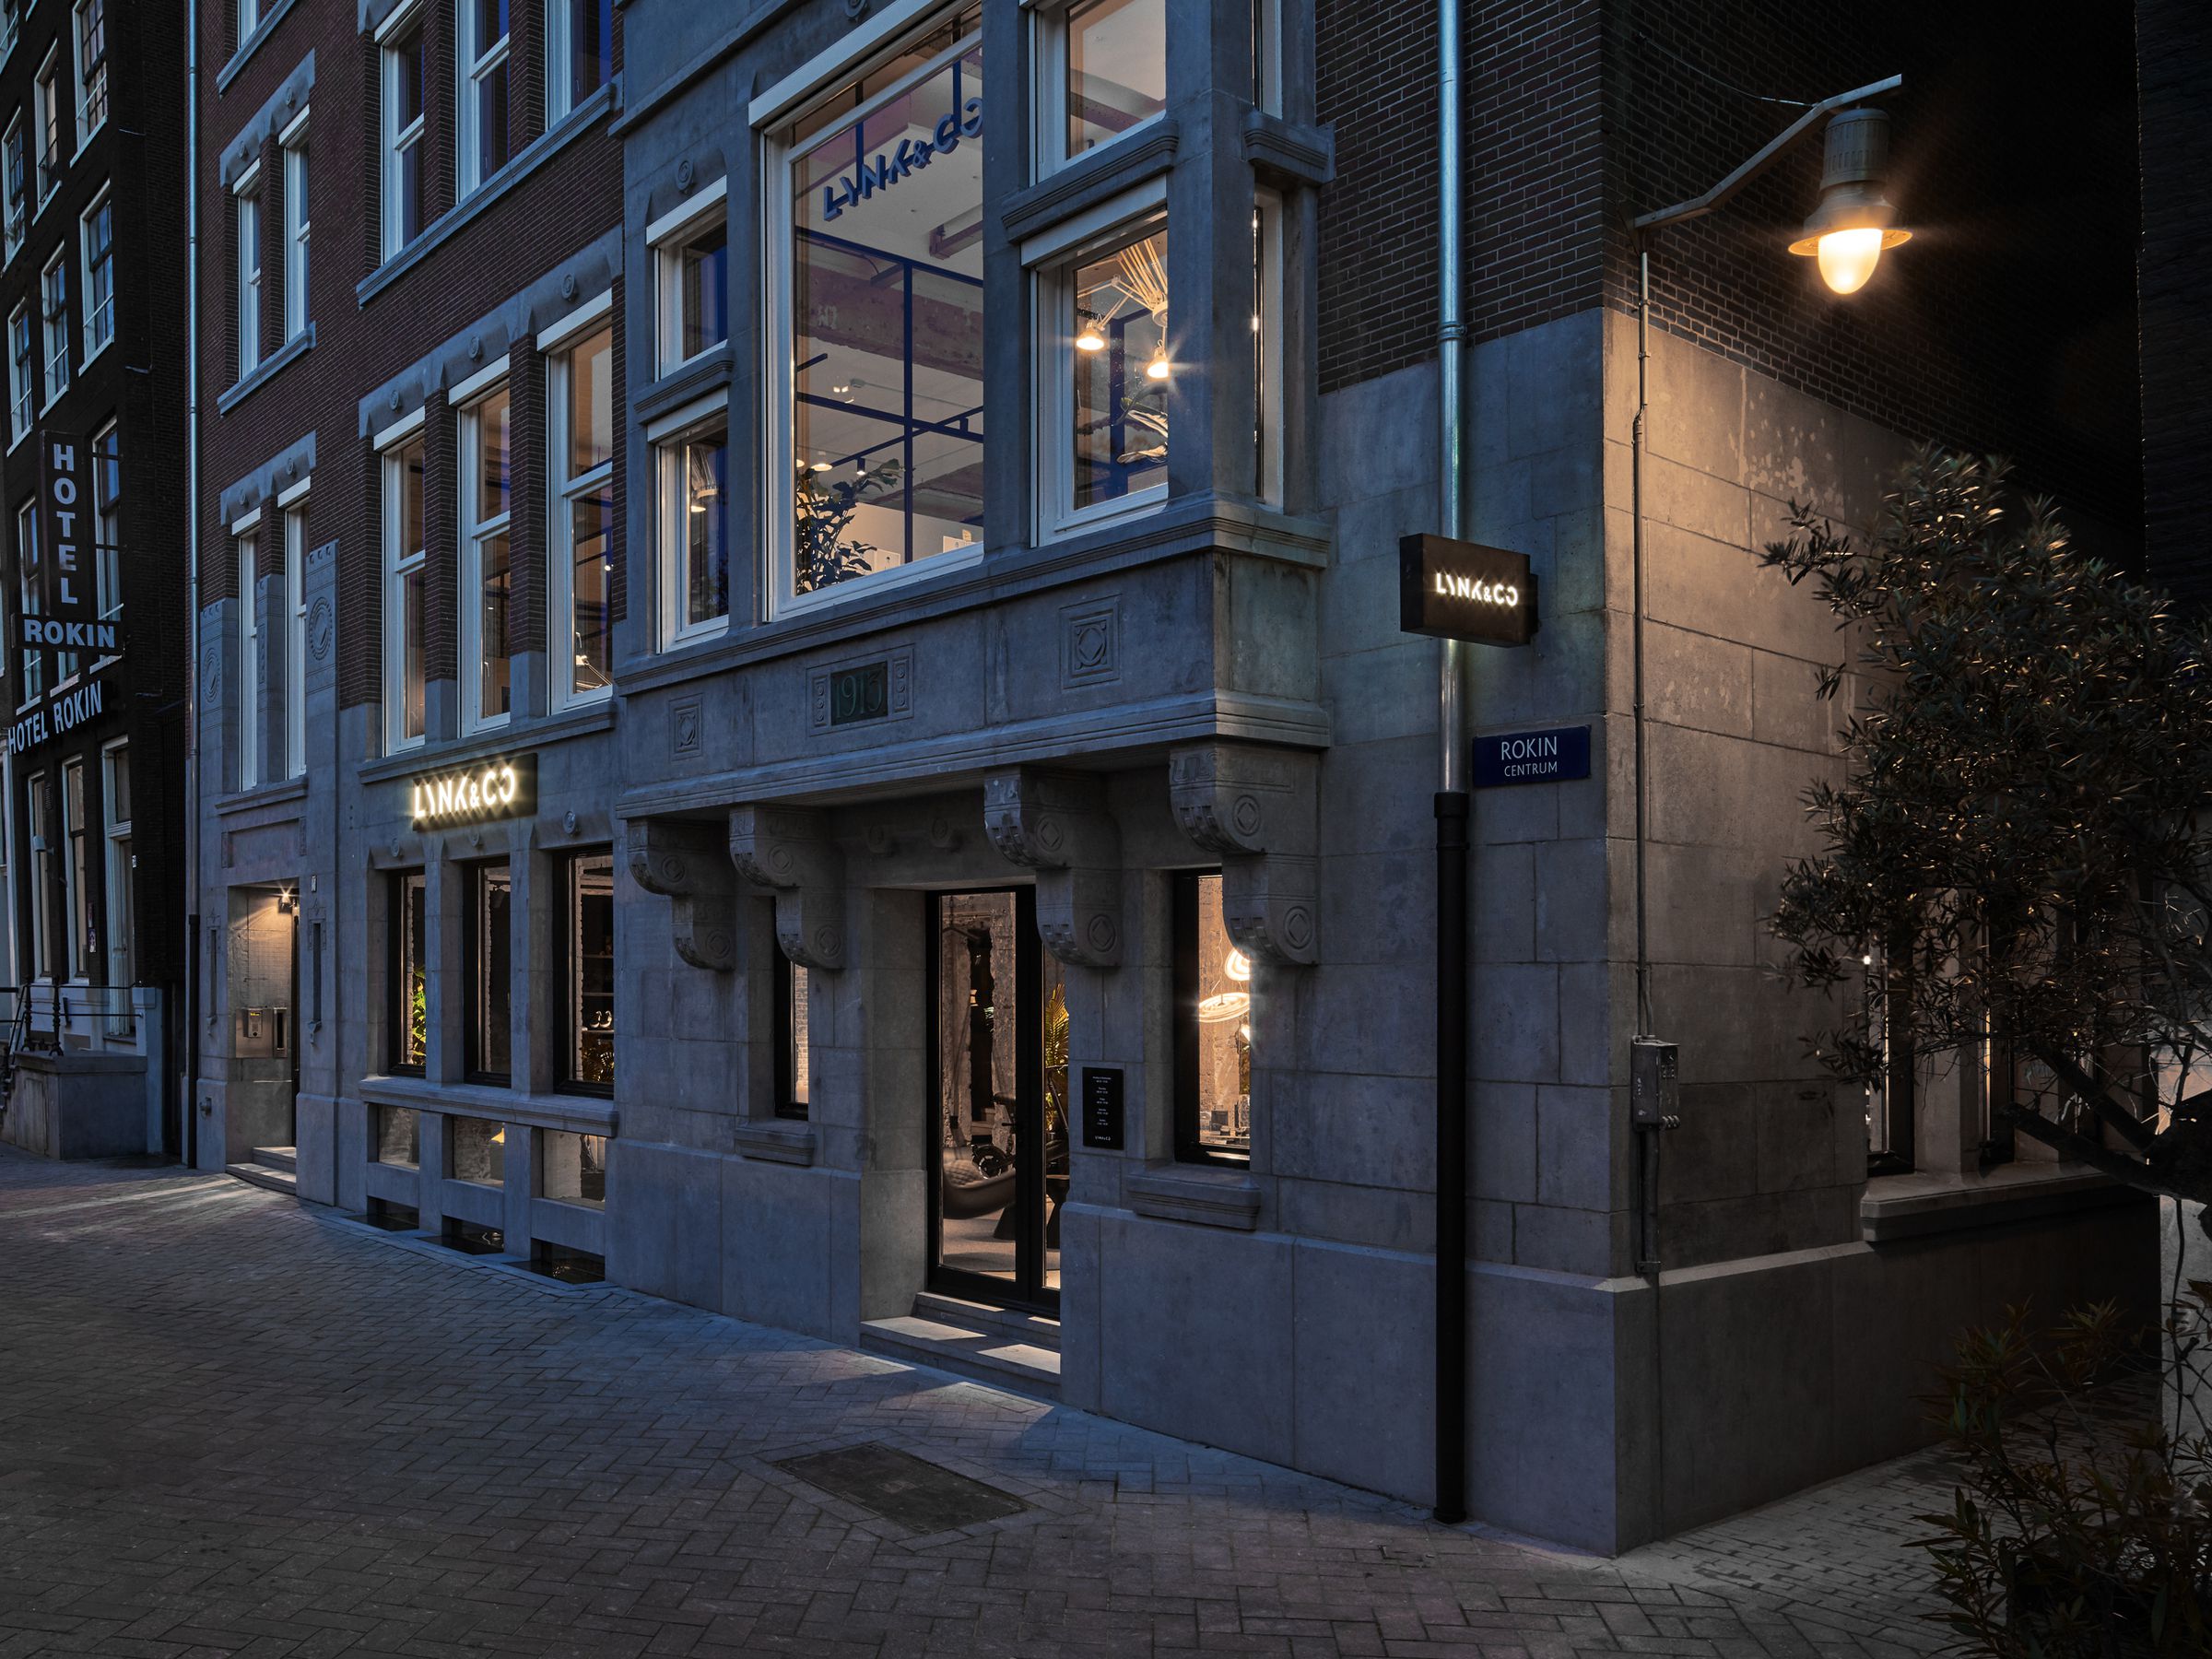 Outside the Amsterdam Club, located at 75 Rokin.